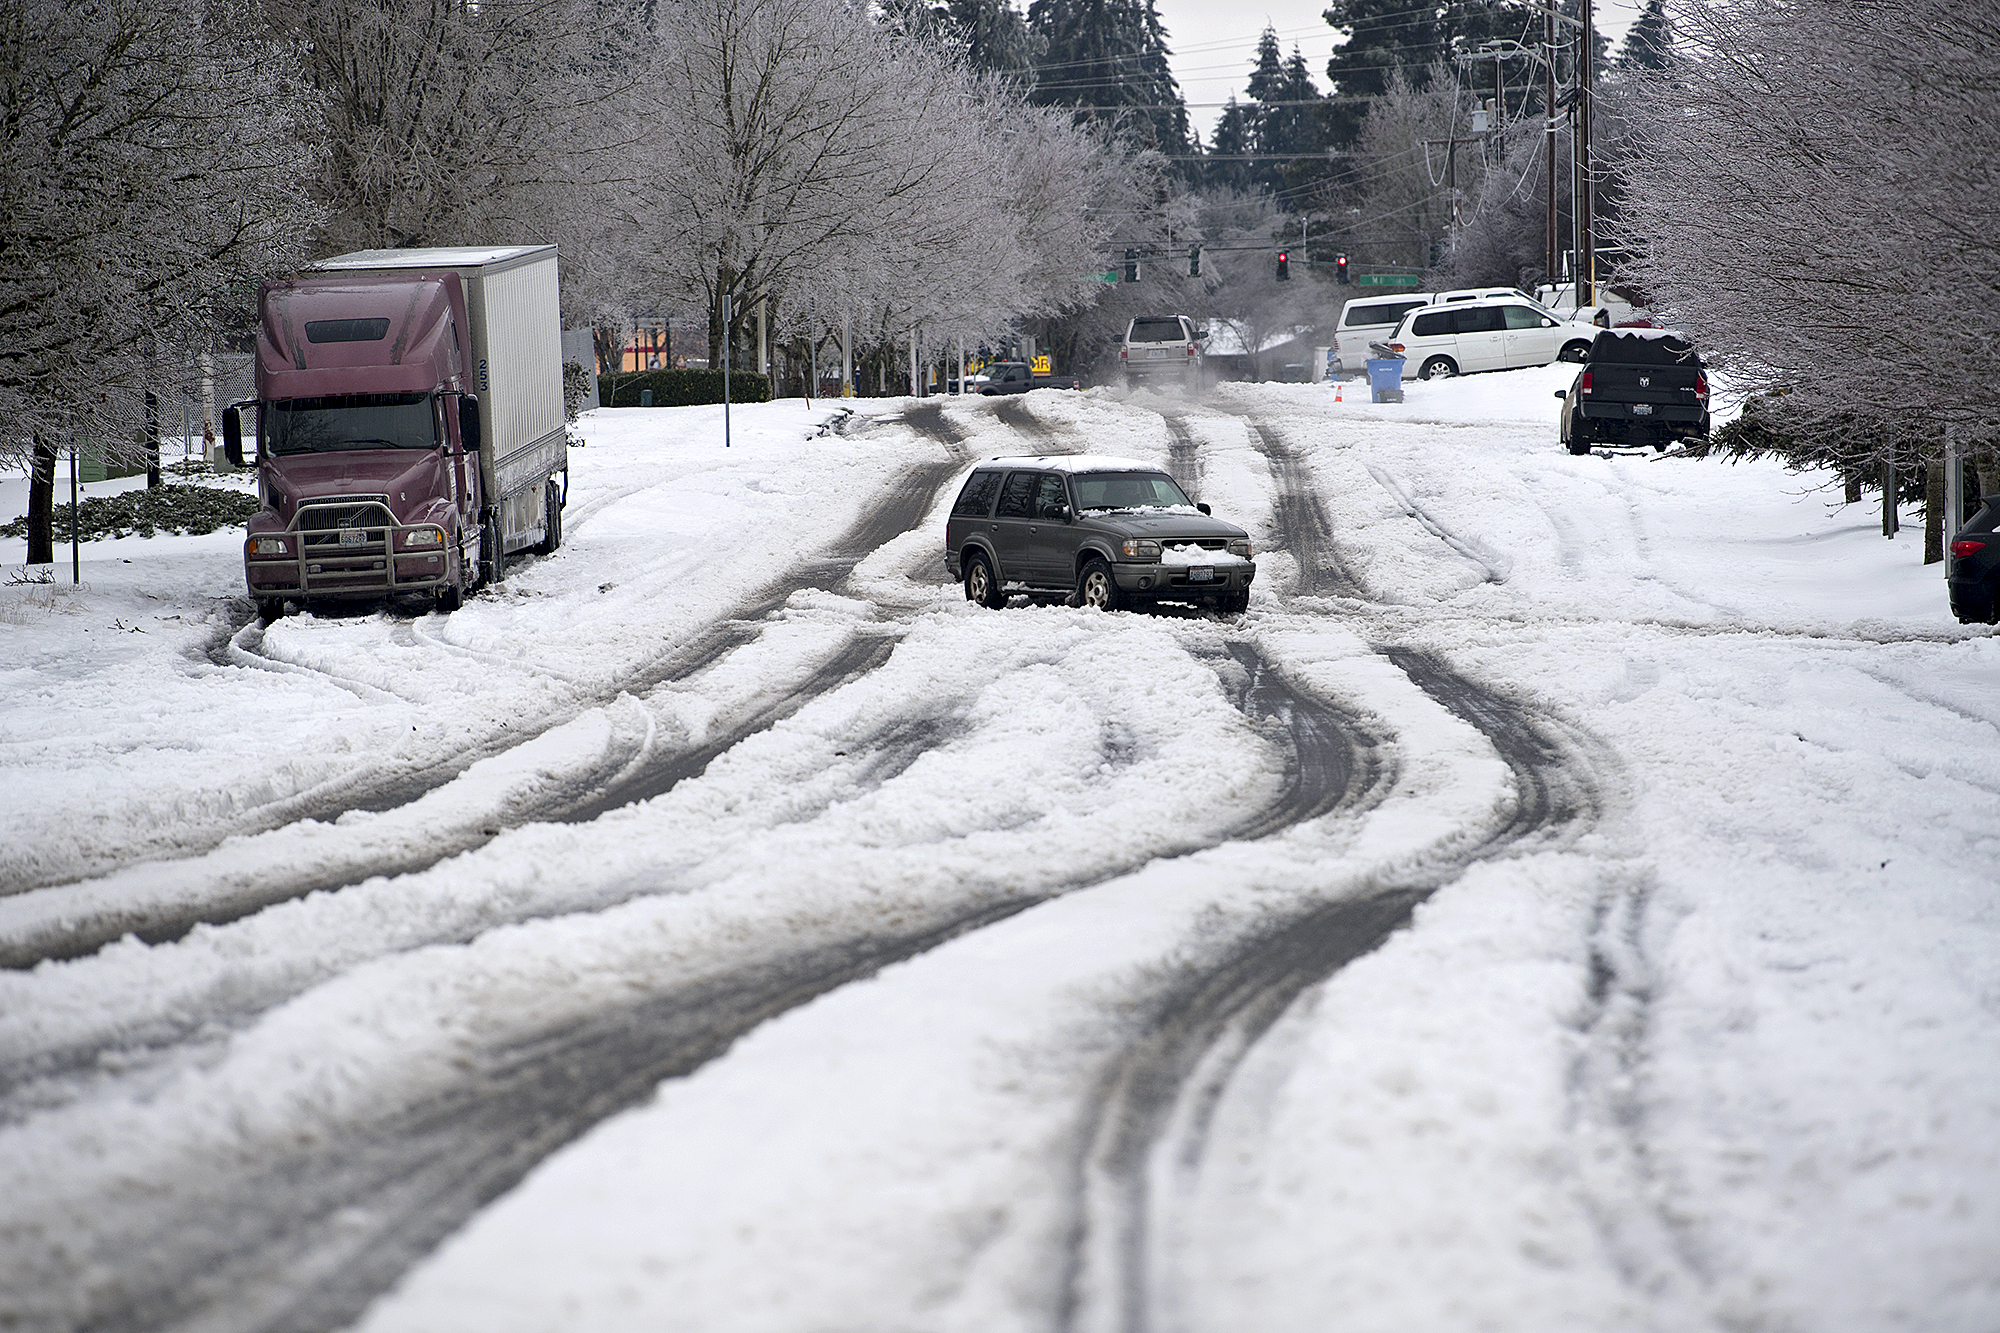 Motorists navigate roads with sketchy winter conditions including snow and ice Monday morning, Feb. 15, 2021.